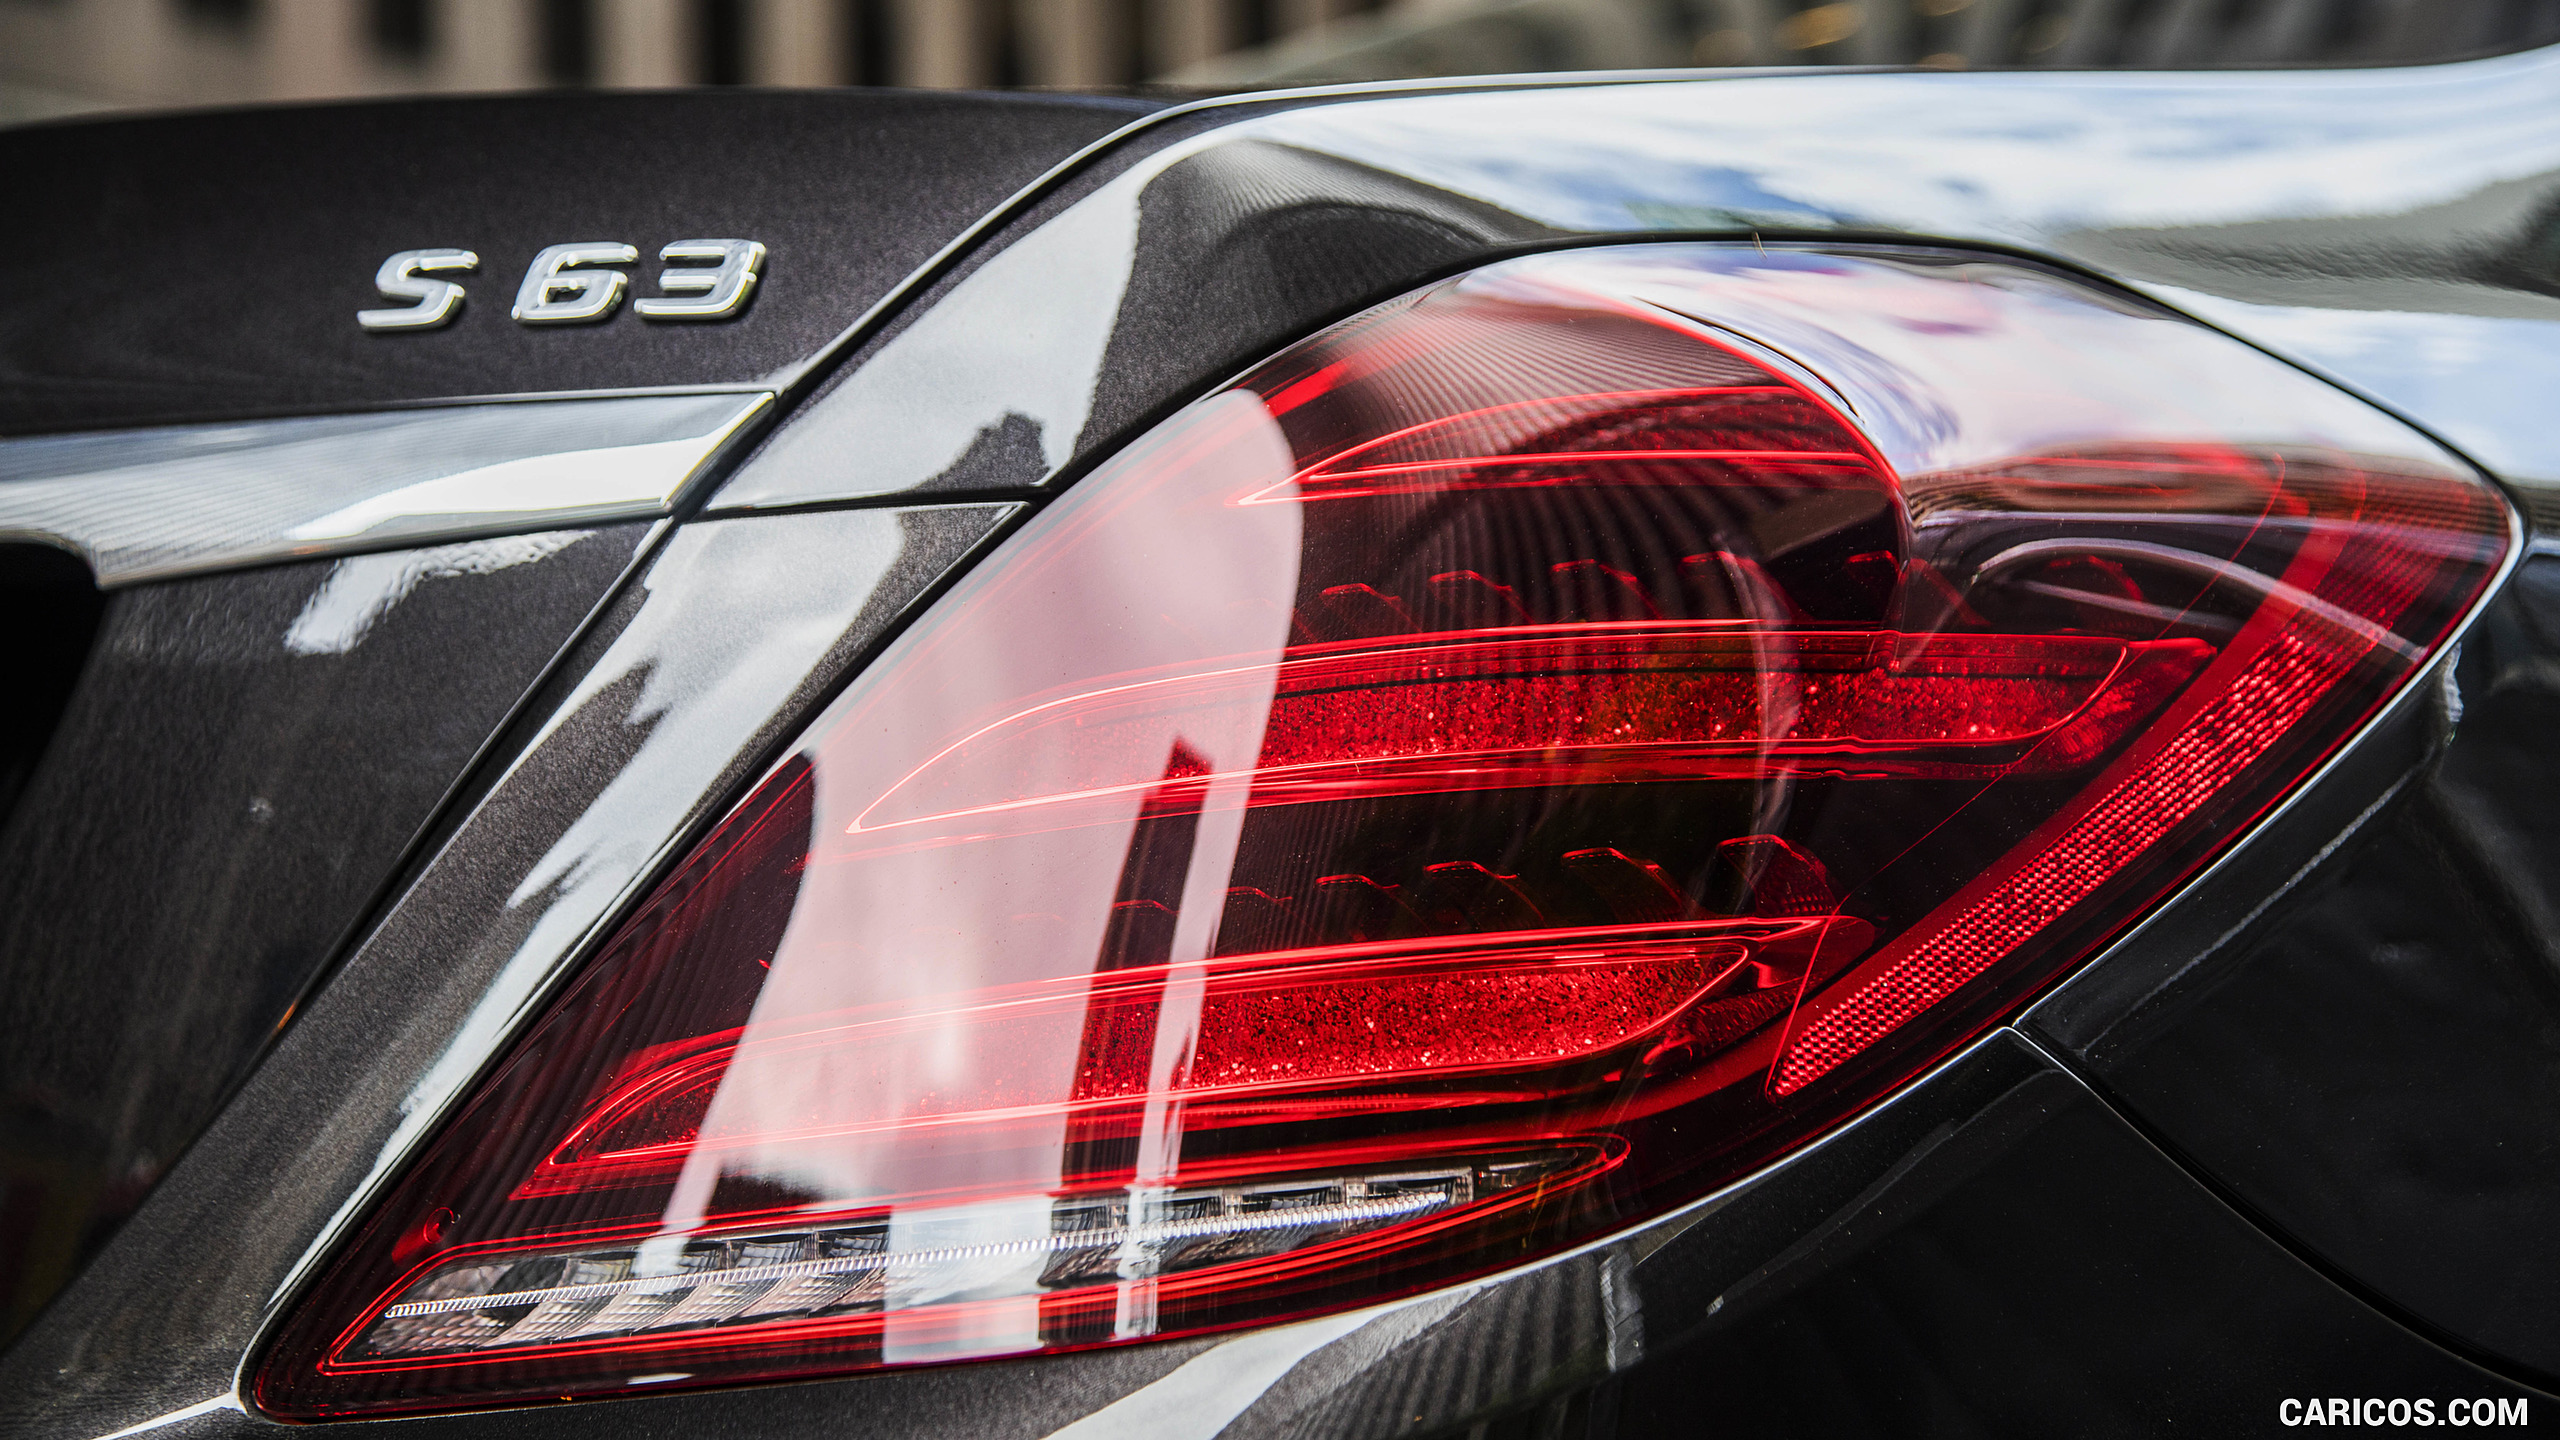 2018 Mercedes-AMG S63 - Tail Light, #97 of 100